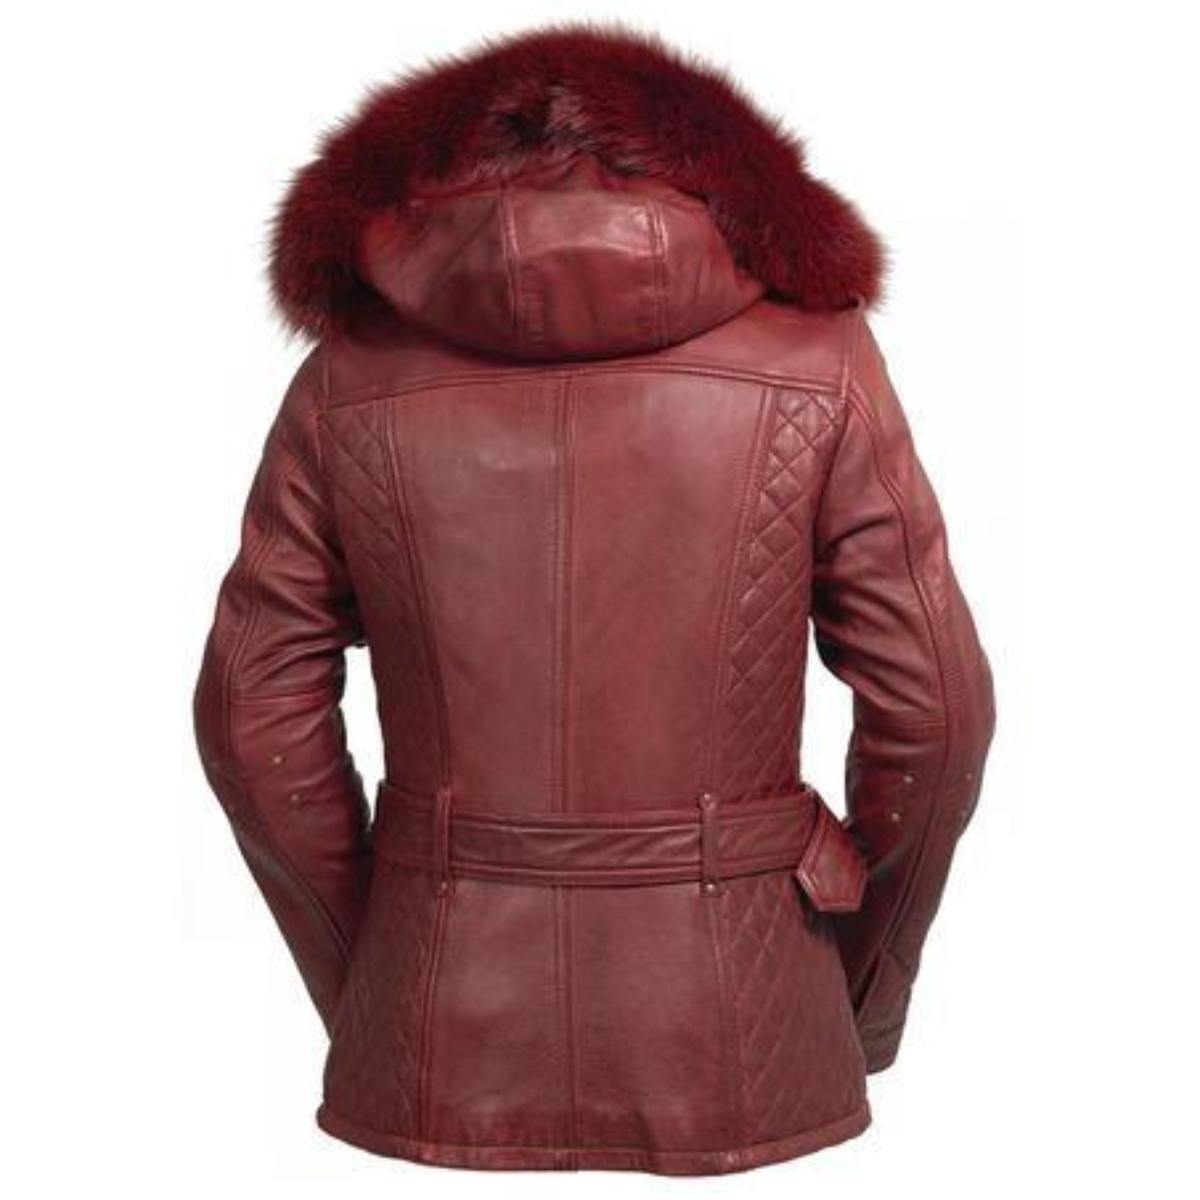 First Manufacturing Elle - Motorcycle Leather Jacket w/ Fox Fur Collar - American Legend Rider